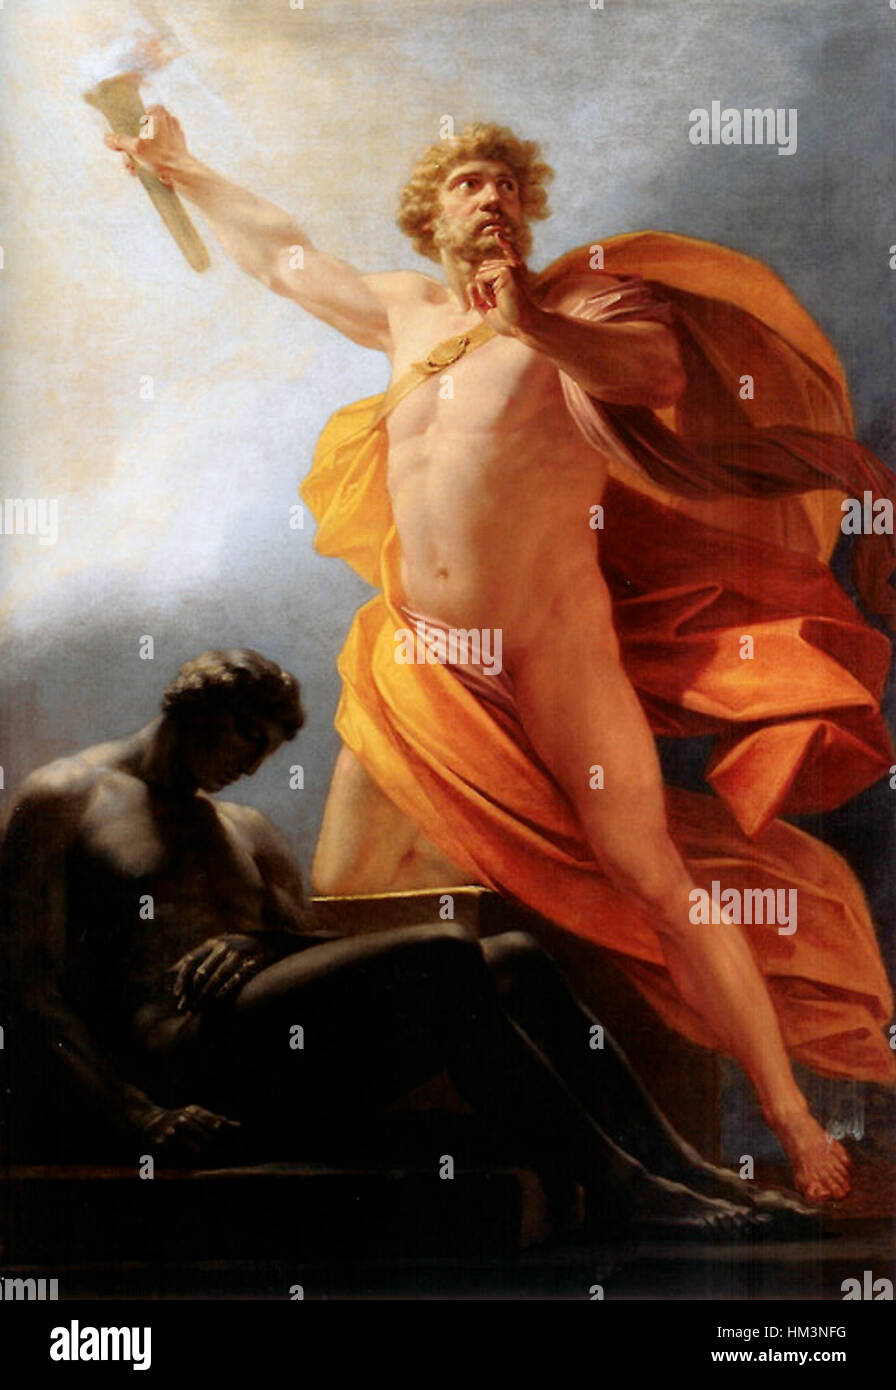 Heinrich fueger 1817 prometheus brings fire to mankind Stock Photo